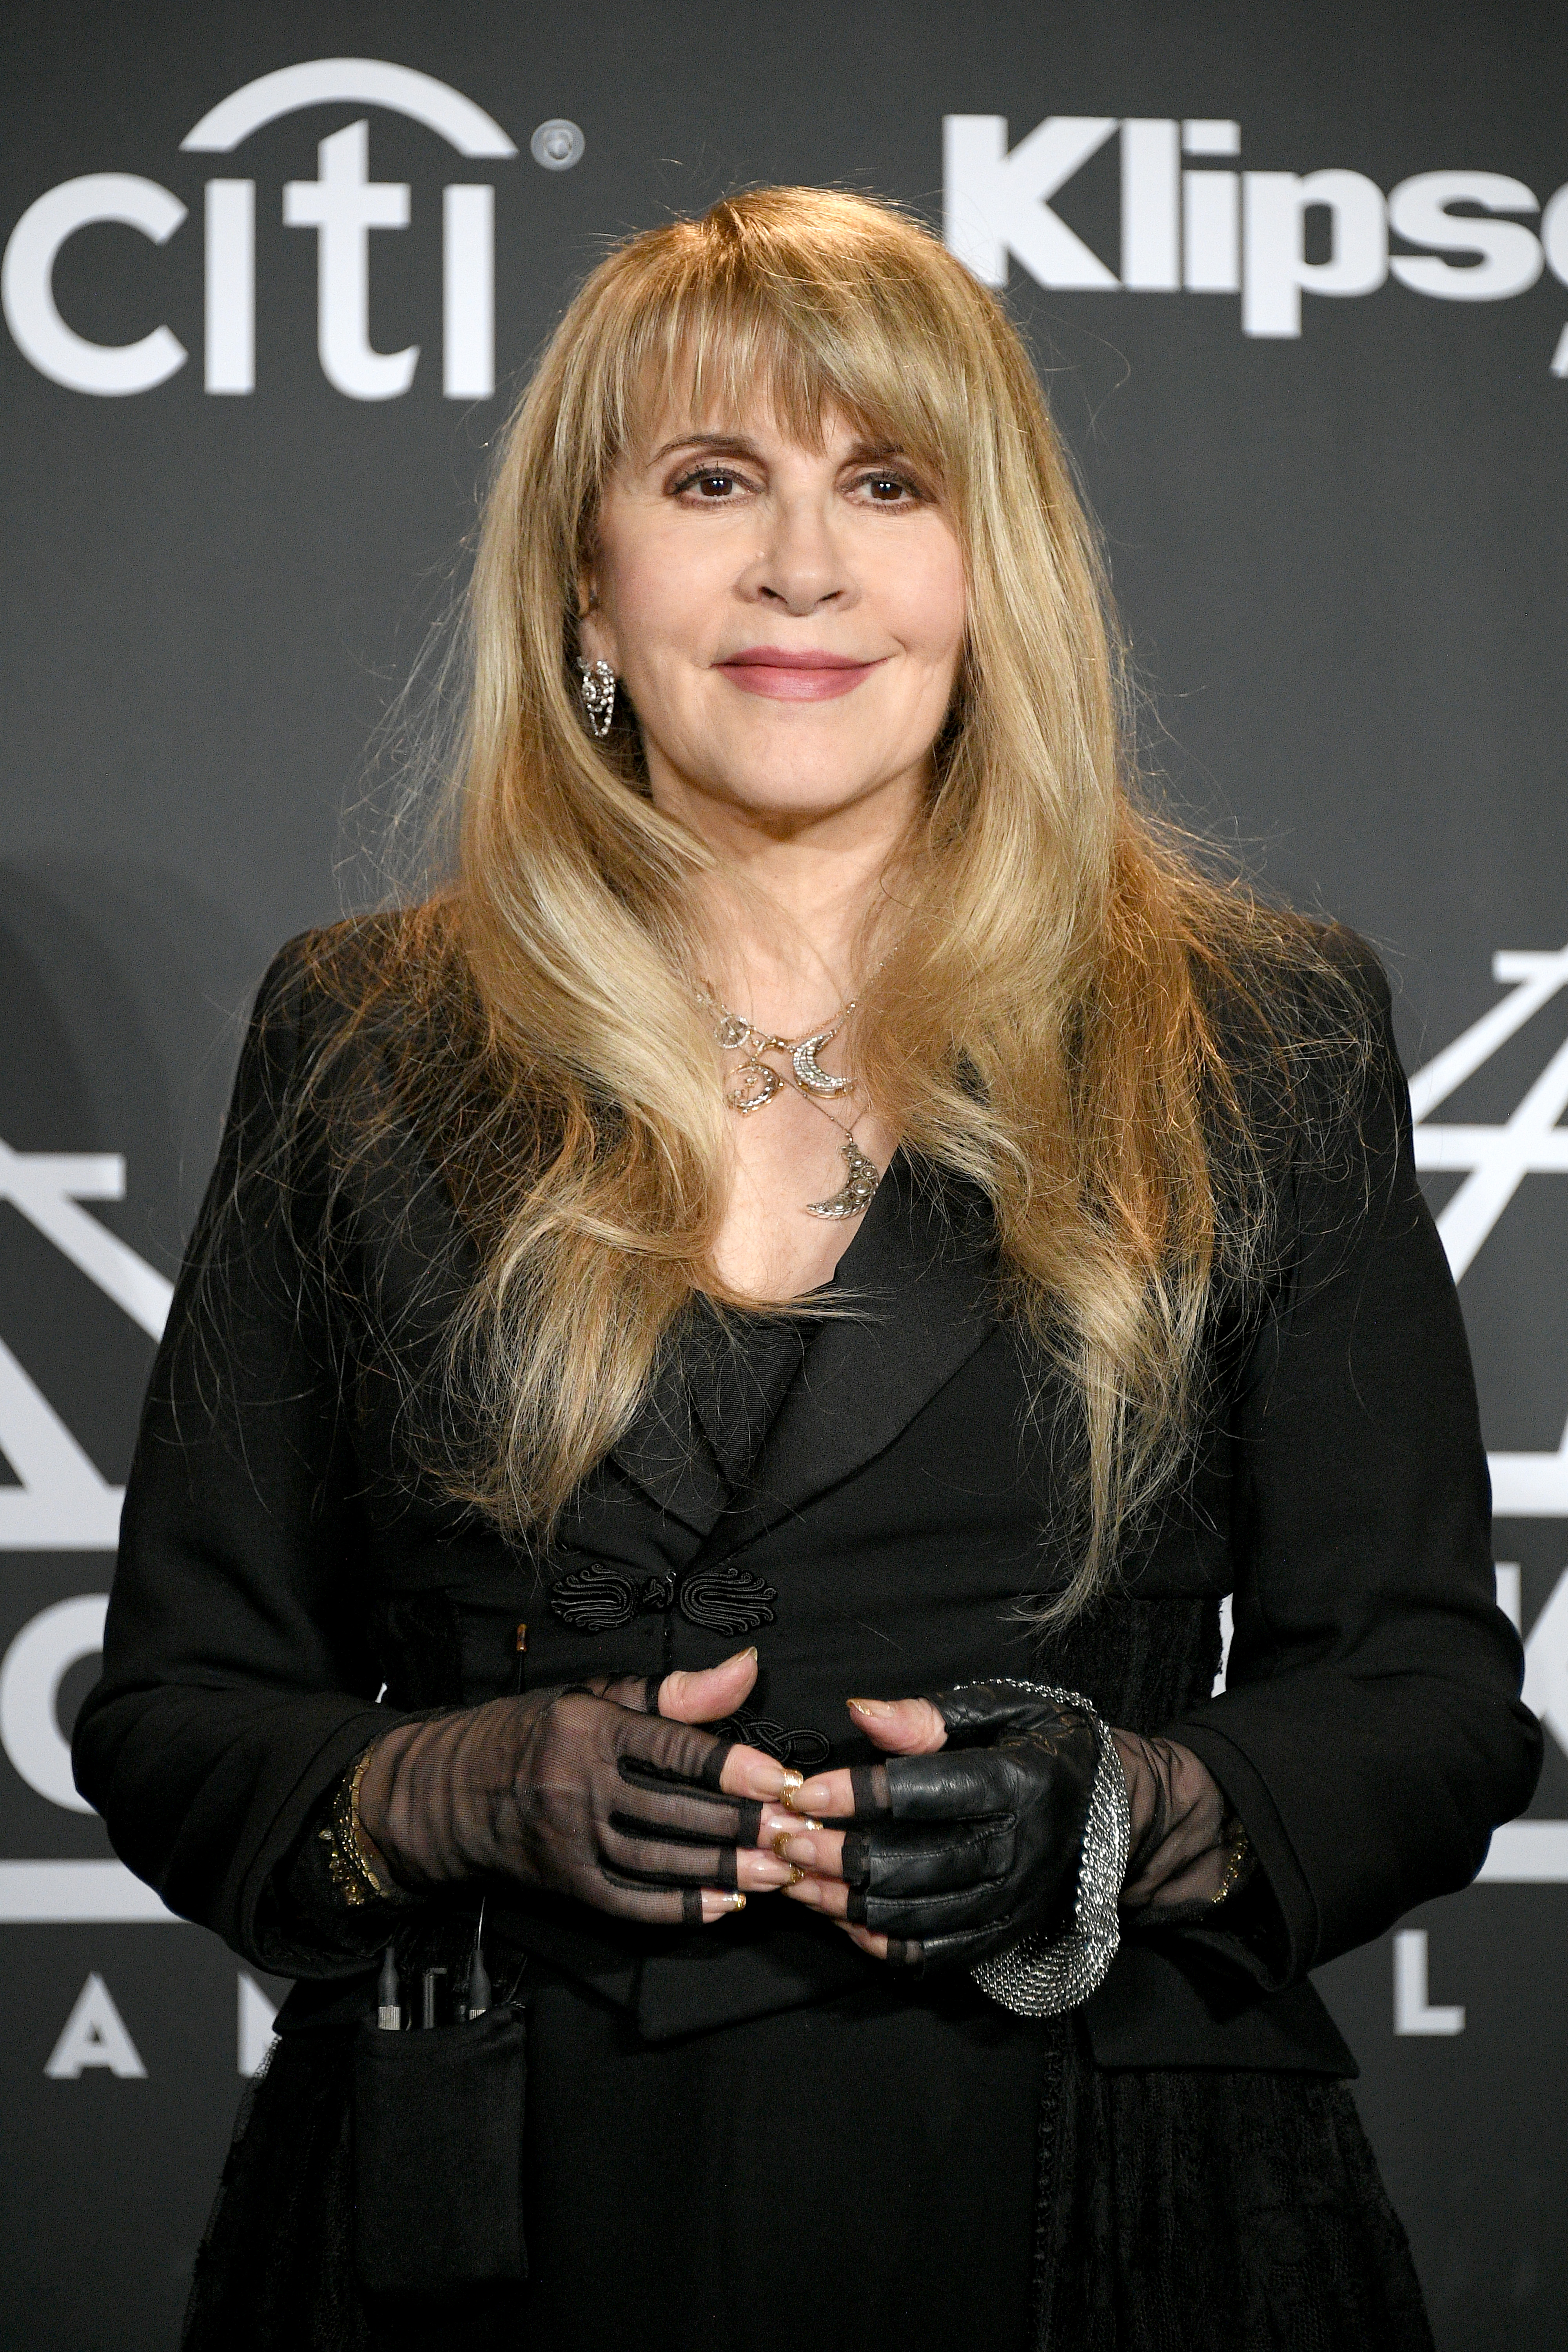 Stevie Nicks is set to perform her next shows on Tuesday and Friday before she heads off to Europe